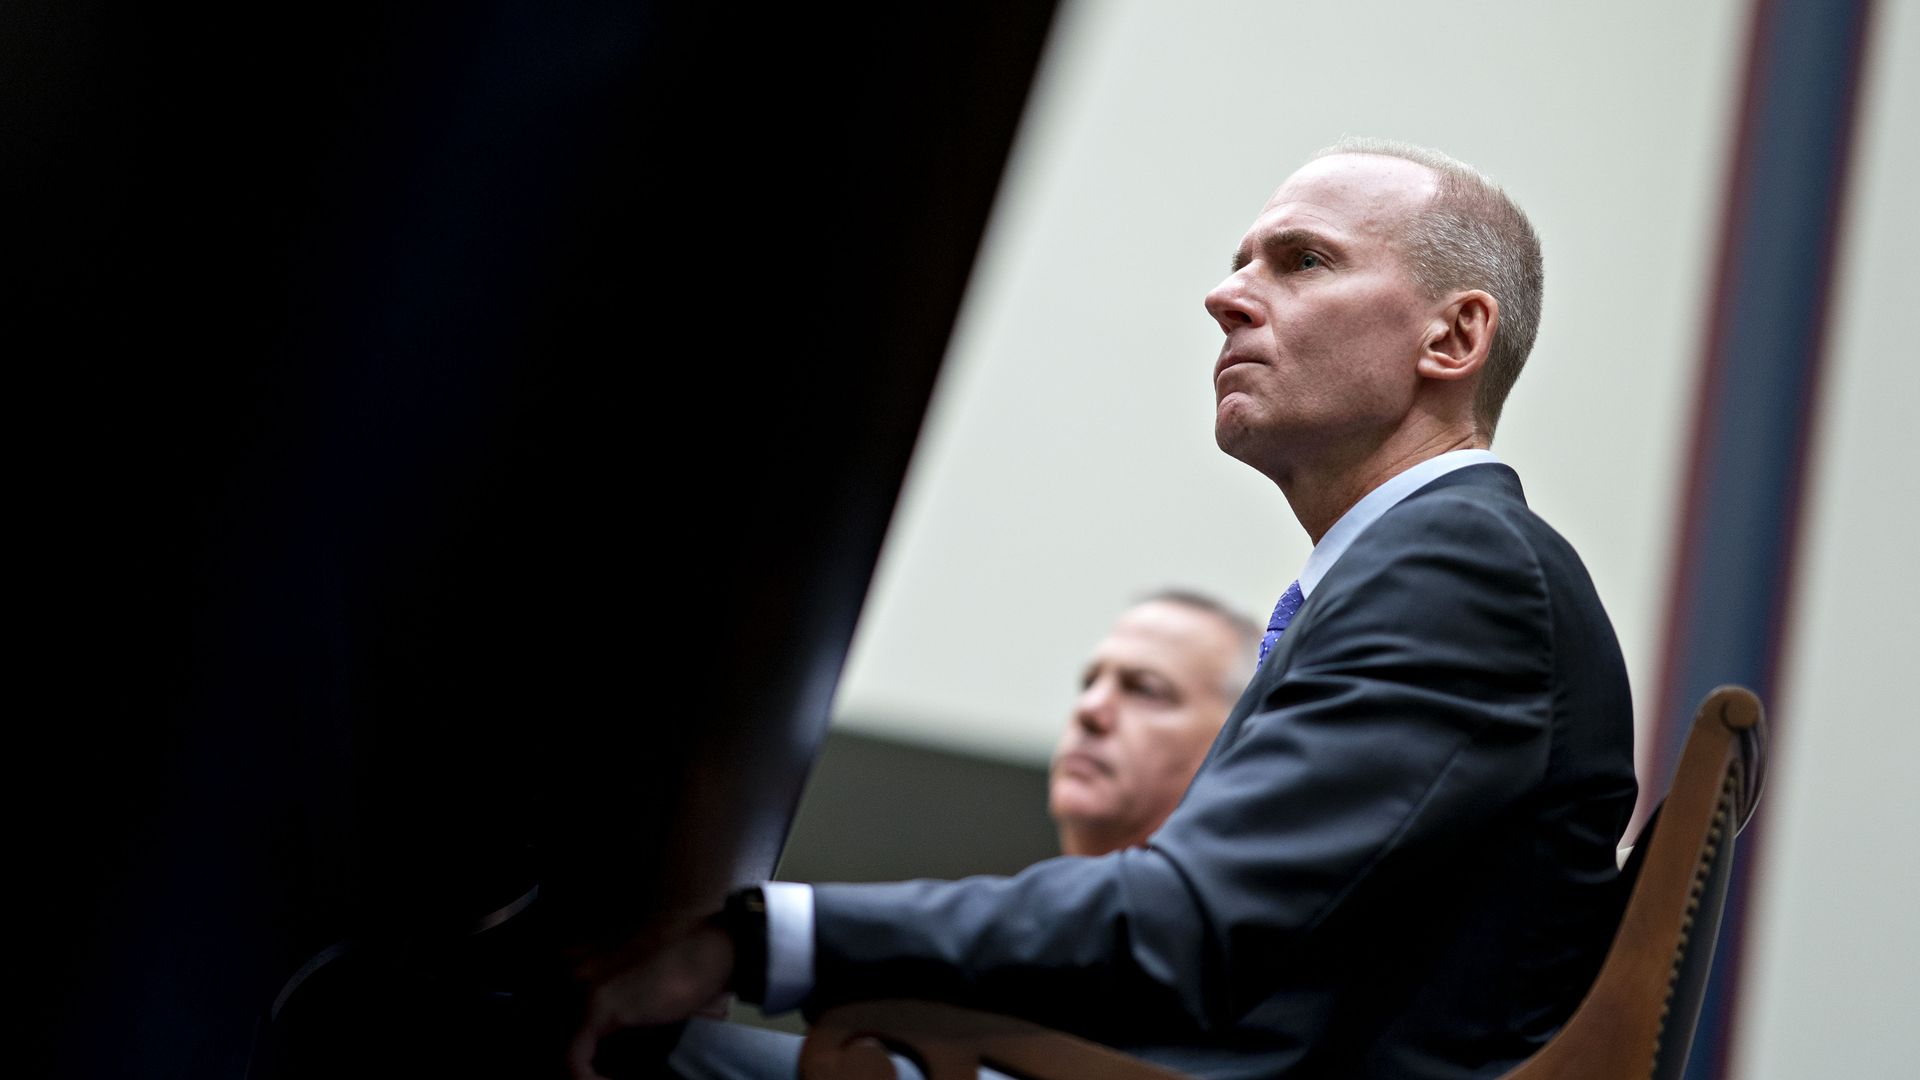 Dennis Muilenburg, chief executive officer of Boeing Co.